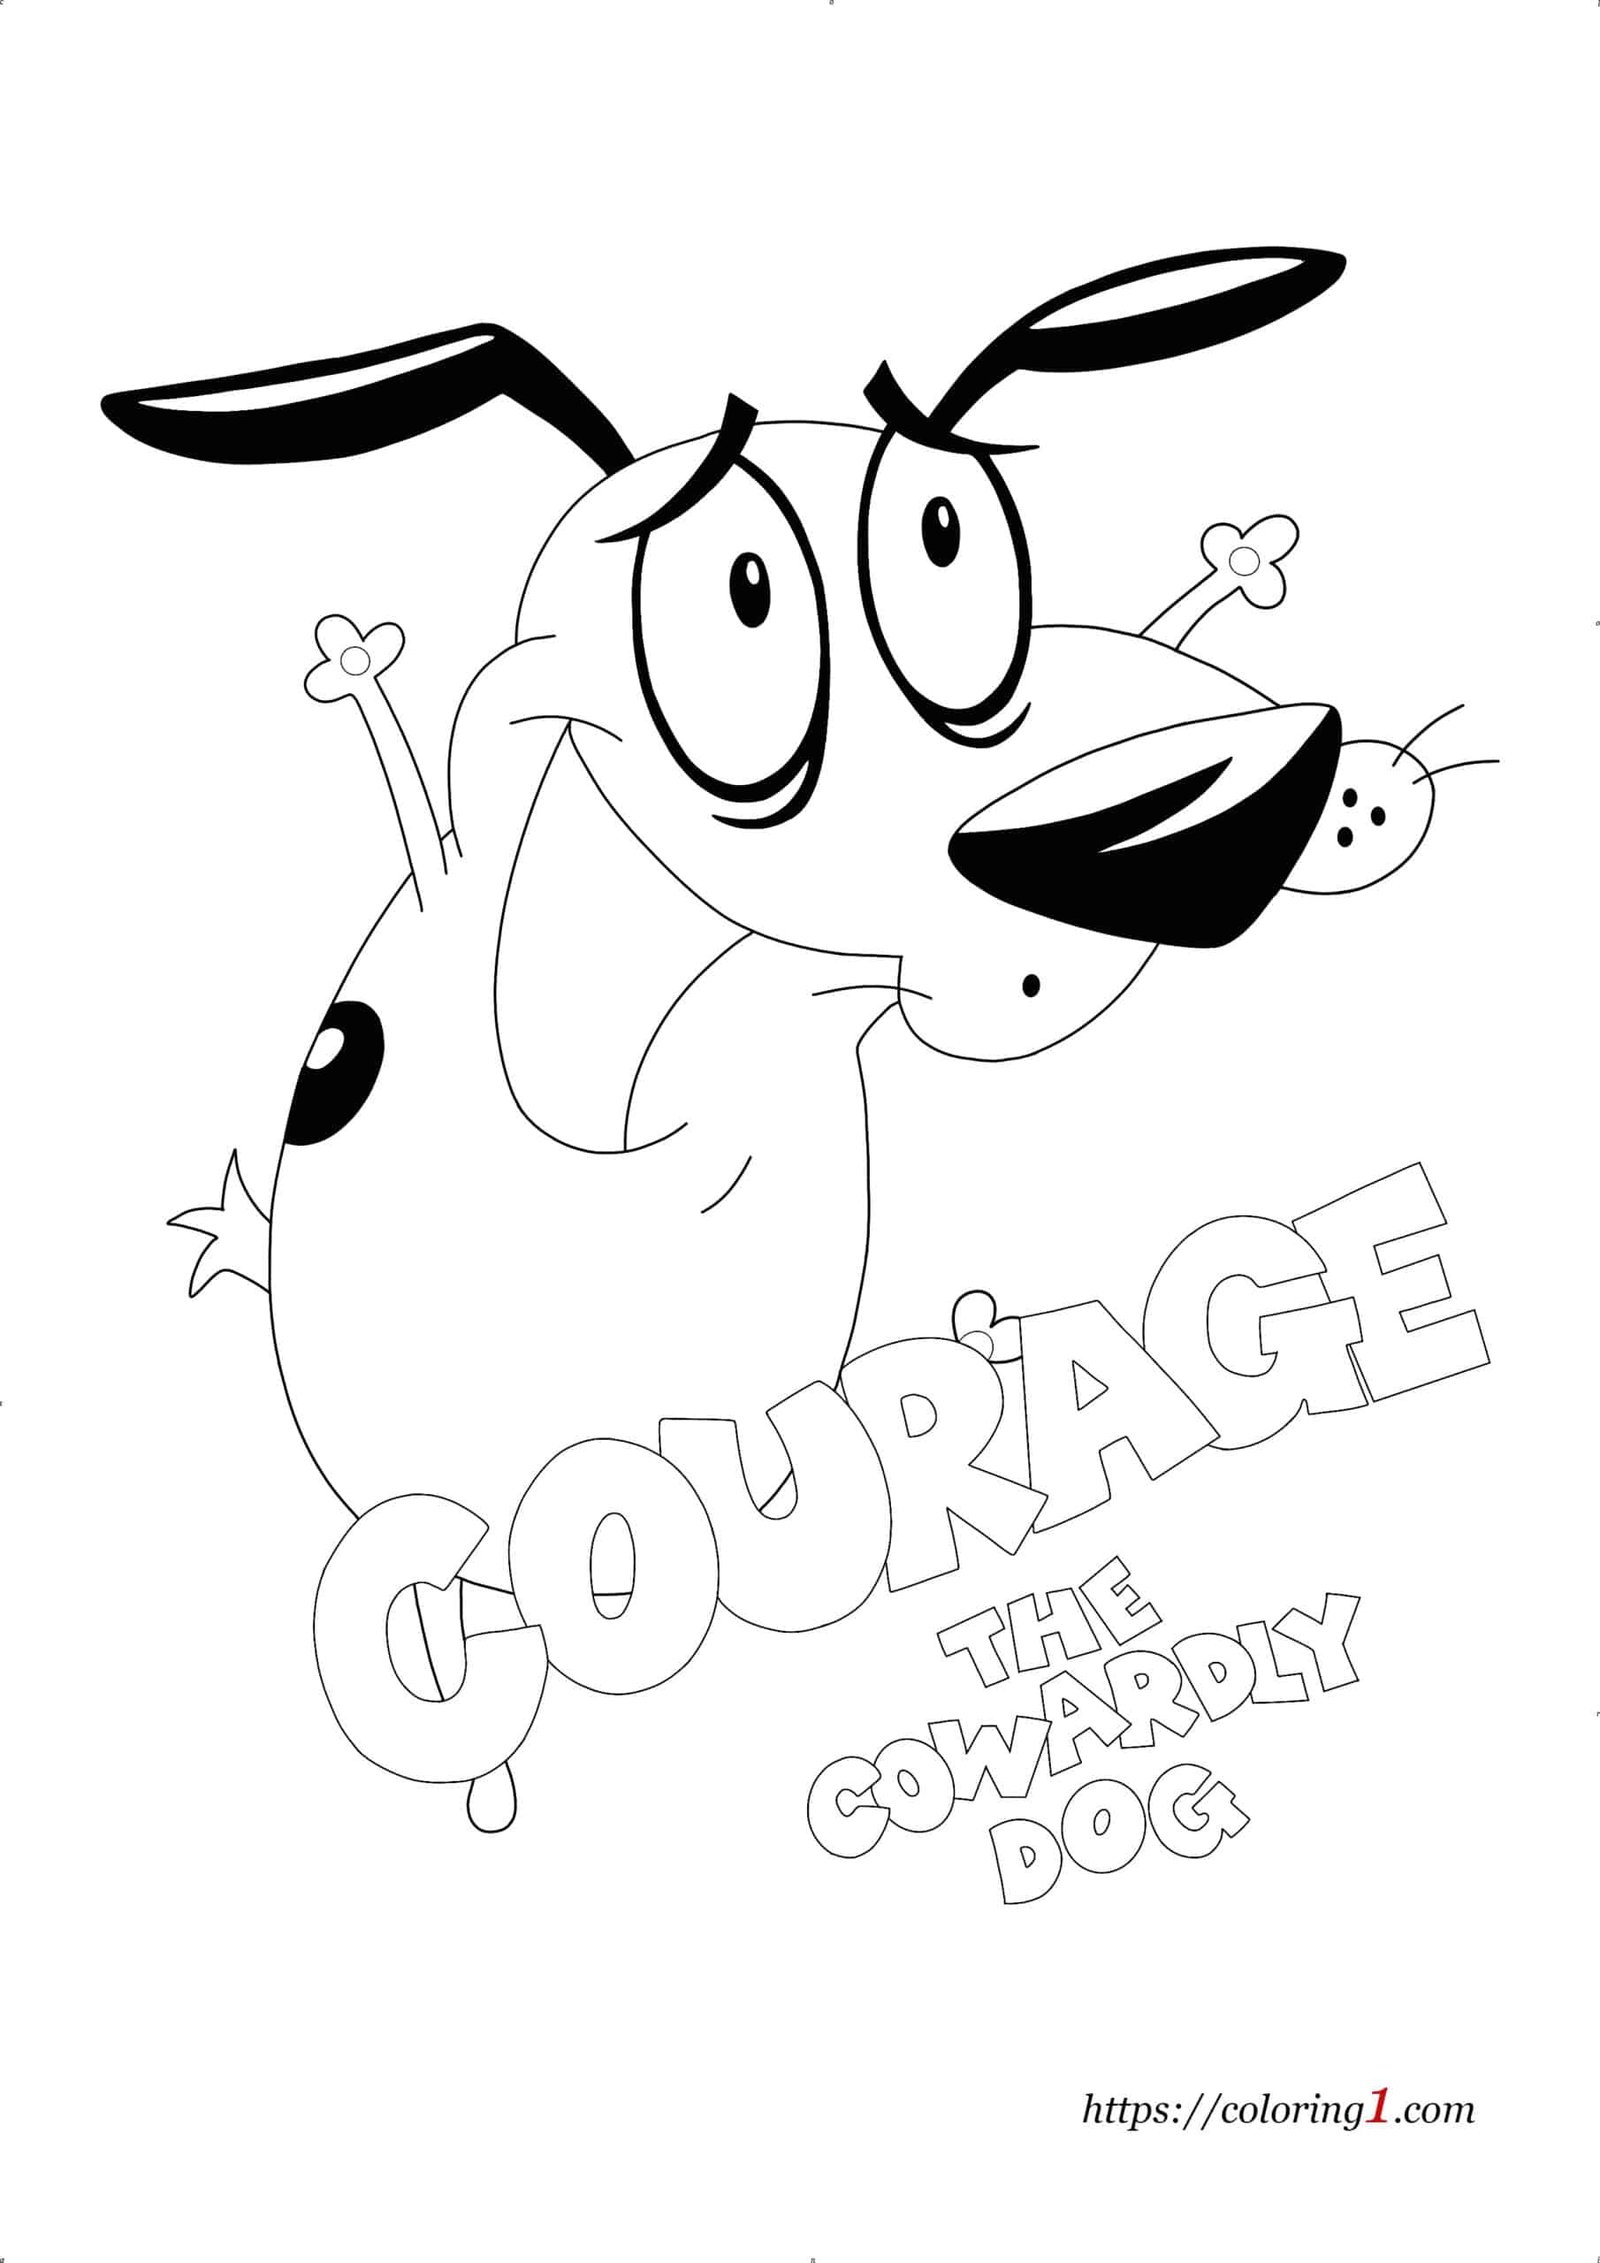 Courage The Cowardly Dog coloring page